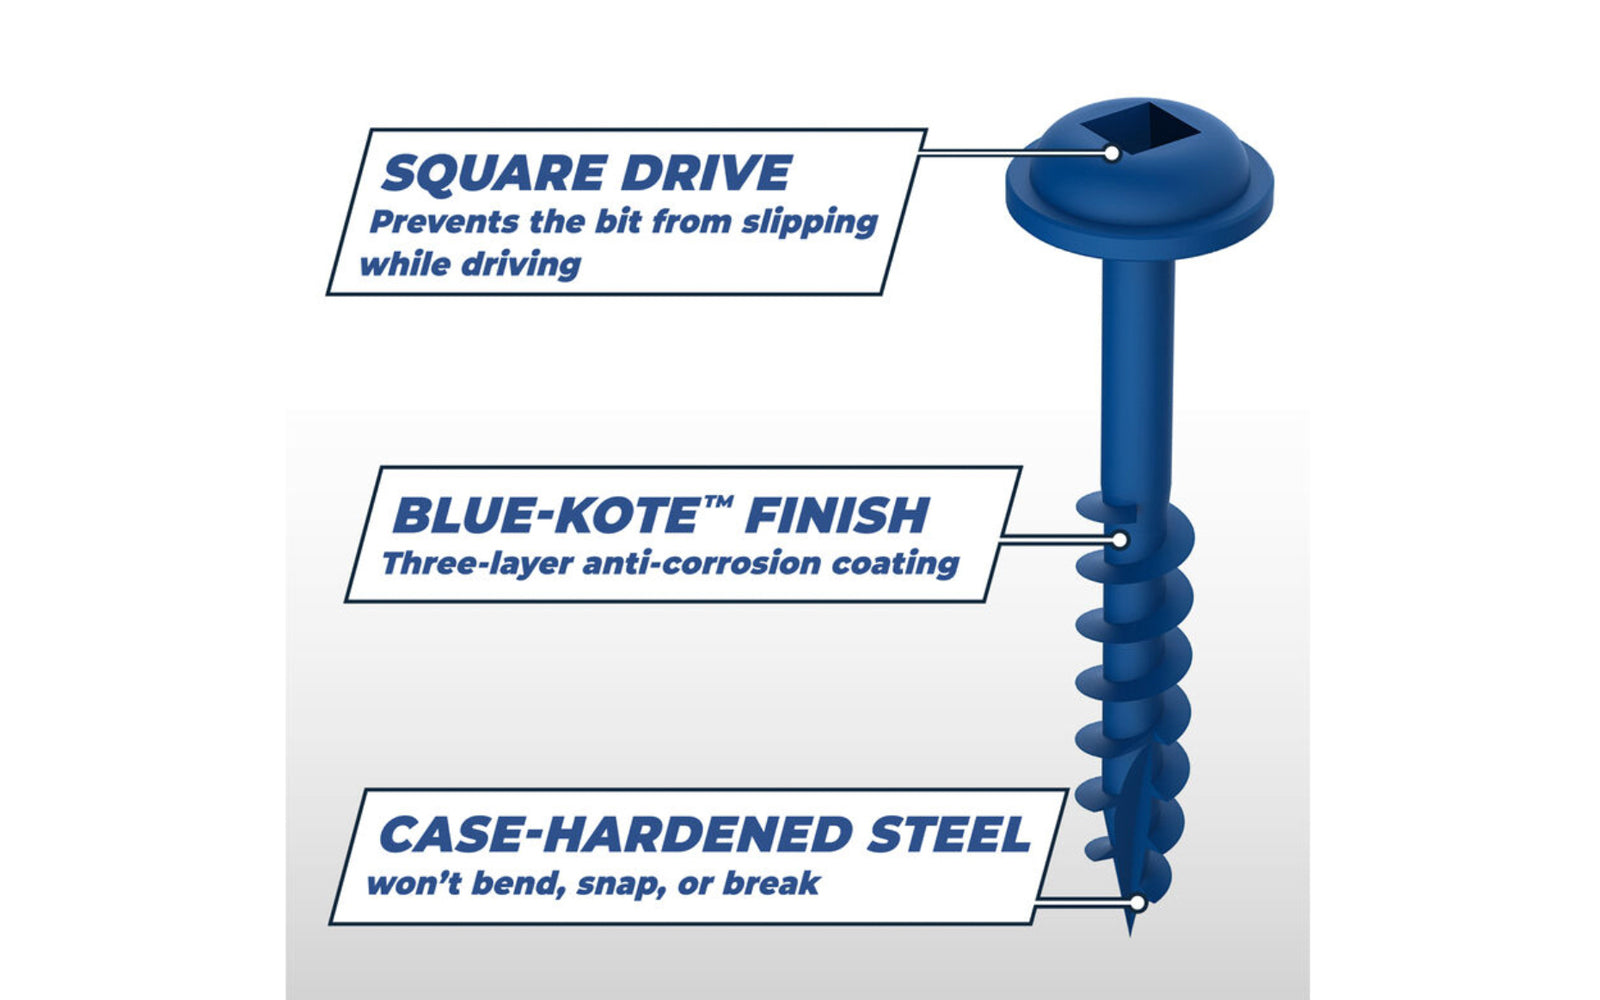 The Kreg "Blue-Kote" Screws feature three anti-corrosion layers, making them the perfect choice for a wide variety of indoor and outdoor projects. "Blue-Kote" Screws provide rust-resistance up to 400% greater than zinc-plated screws and work with pressure-treated material. Maxi-Loc head. SML-C150B-1200